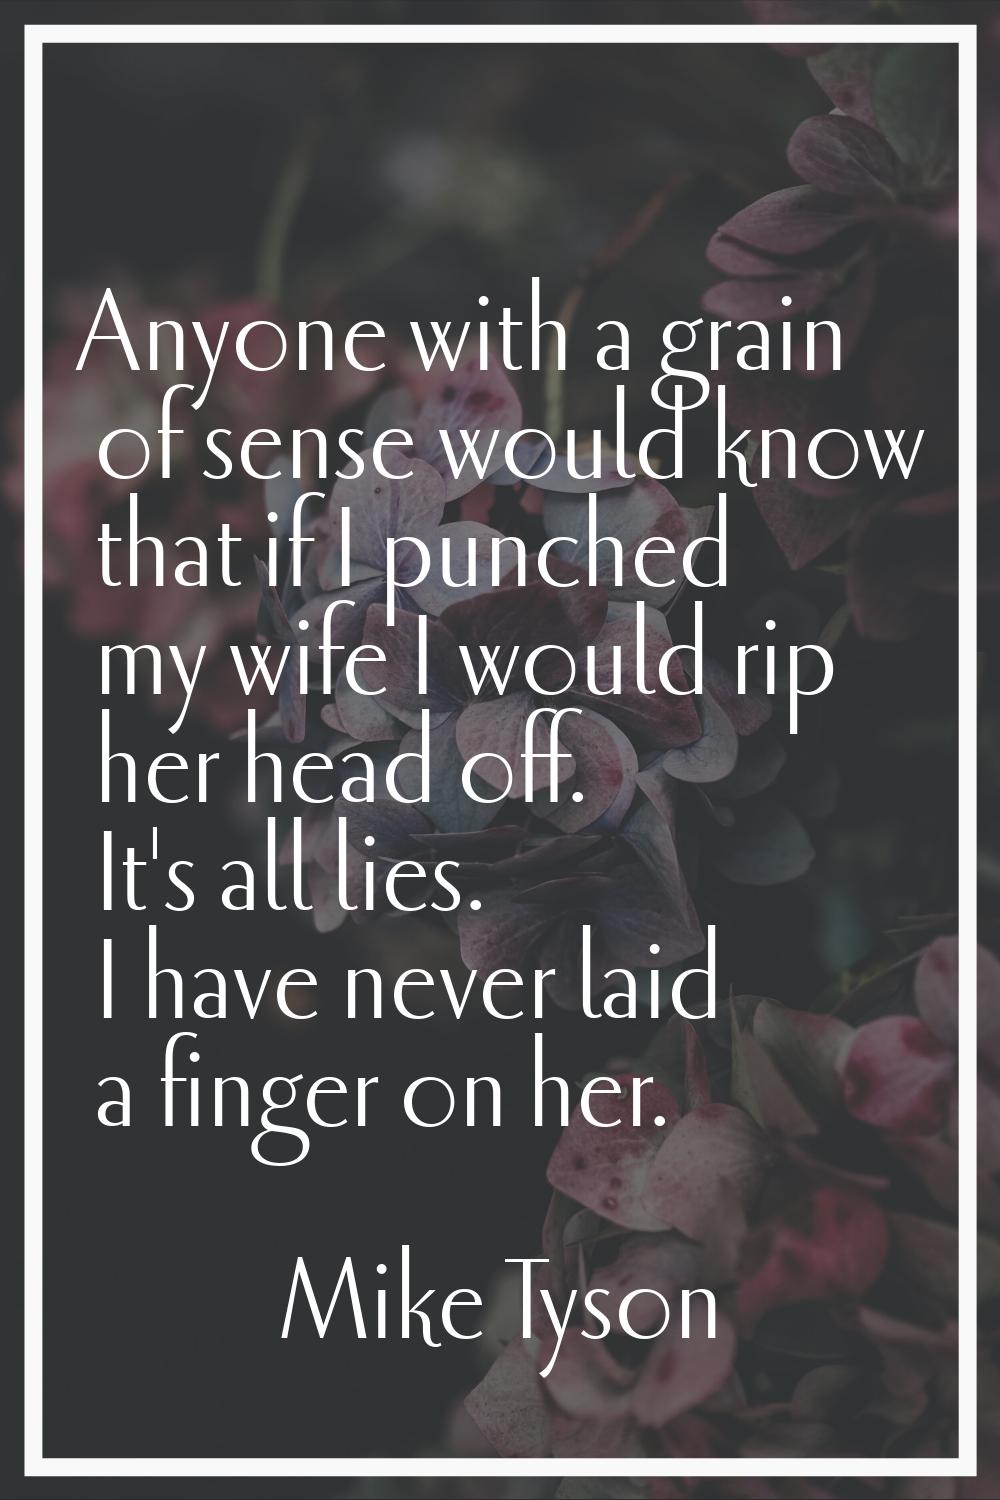 Anyone with a grain of sense would know that if I punched my wife I would rip her head off. It's al